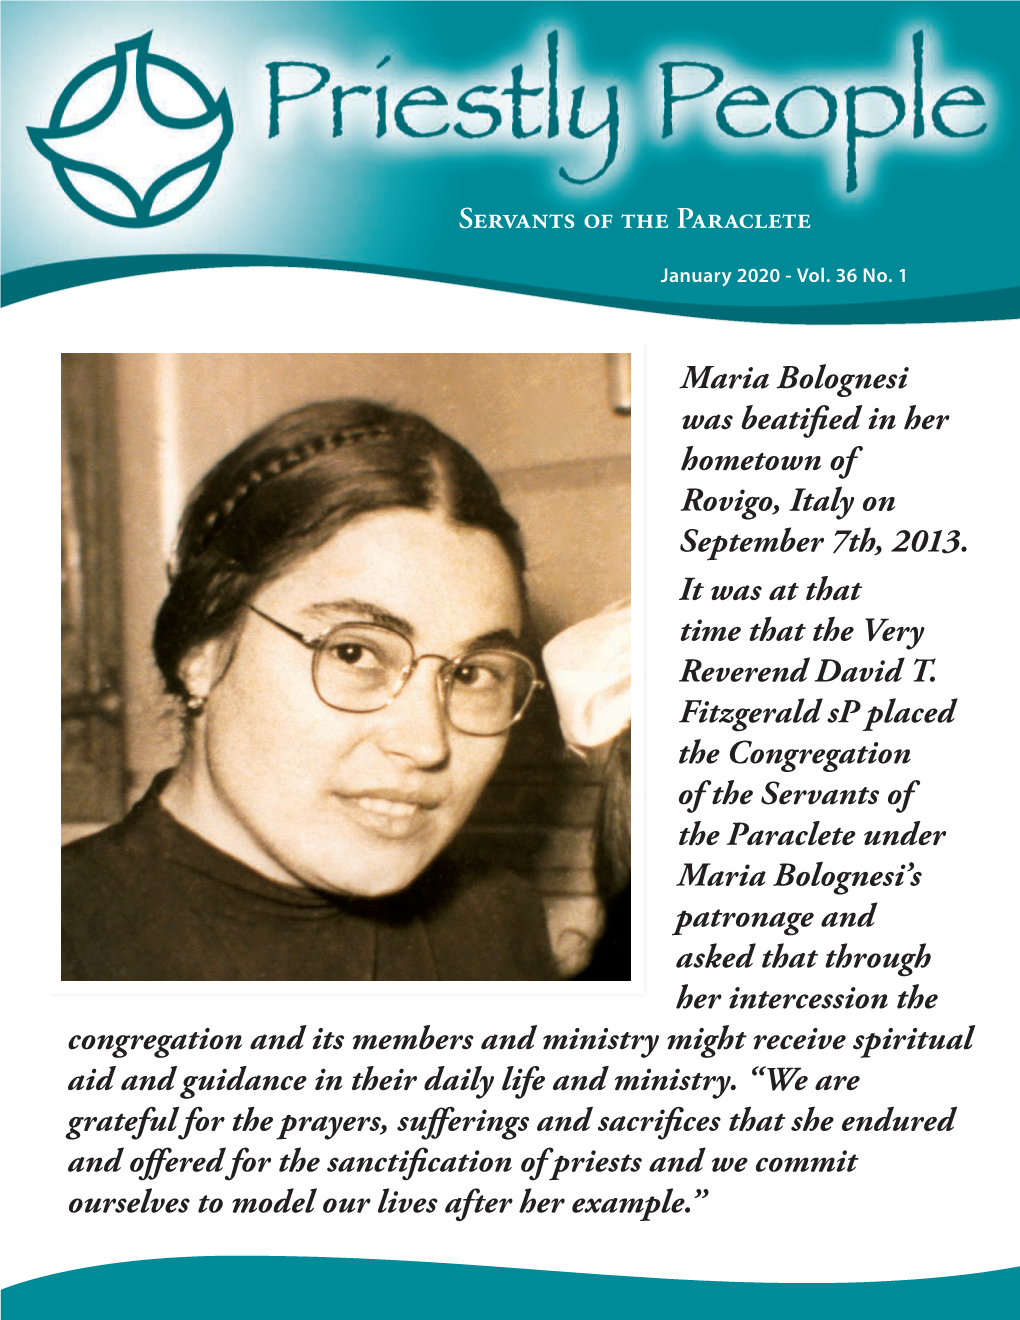 Maria Bolognesi Was Beatified in Her Hometown of Rovigo, Italy on September 7Th, 2013